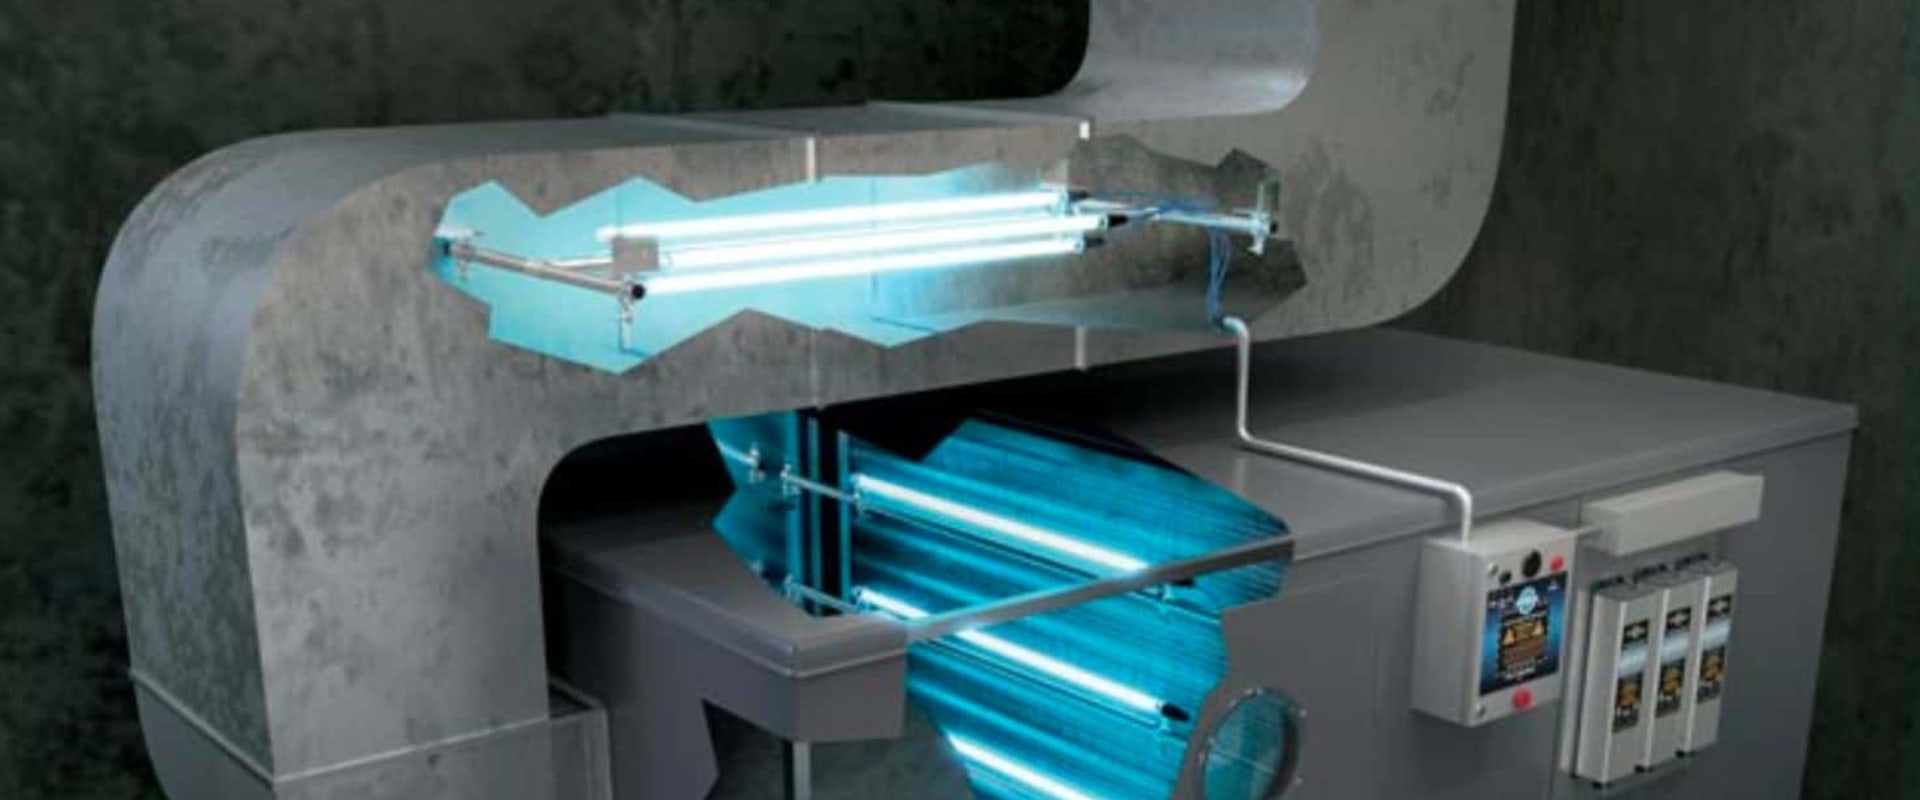 The Benefits and Limitations of Incorporating UV Light Technology in HVAC Systems